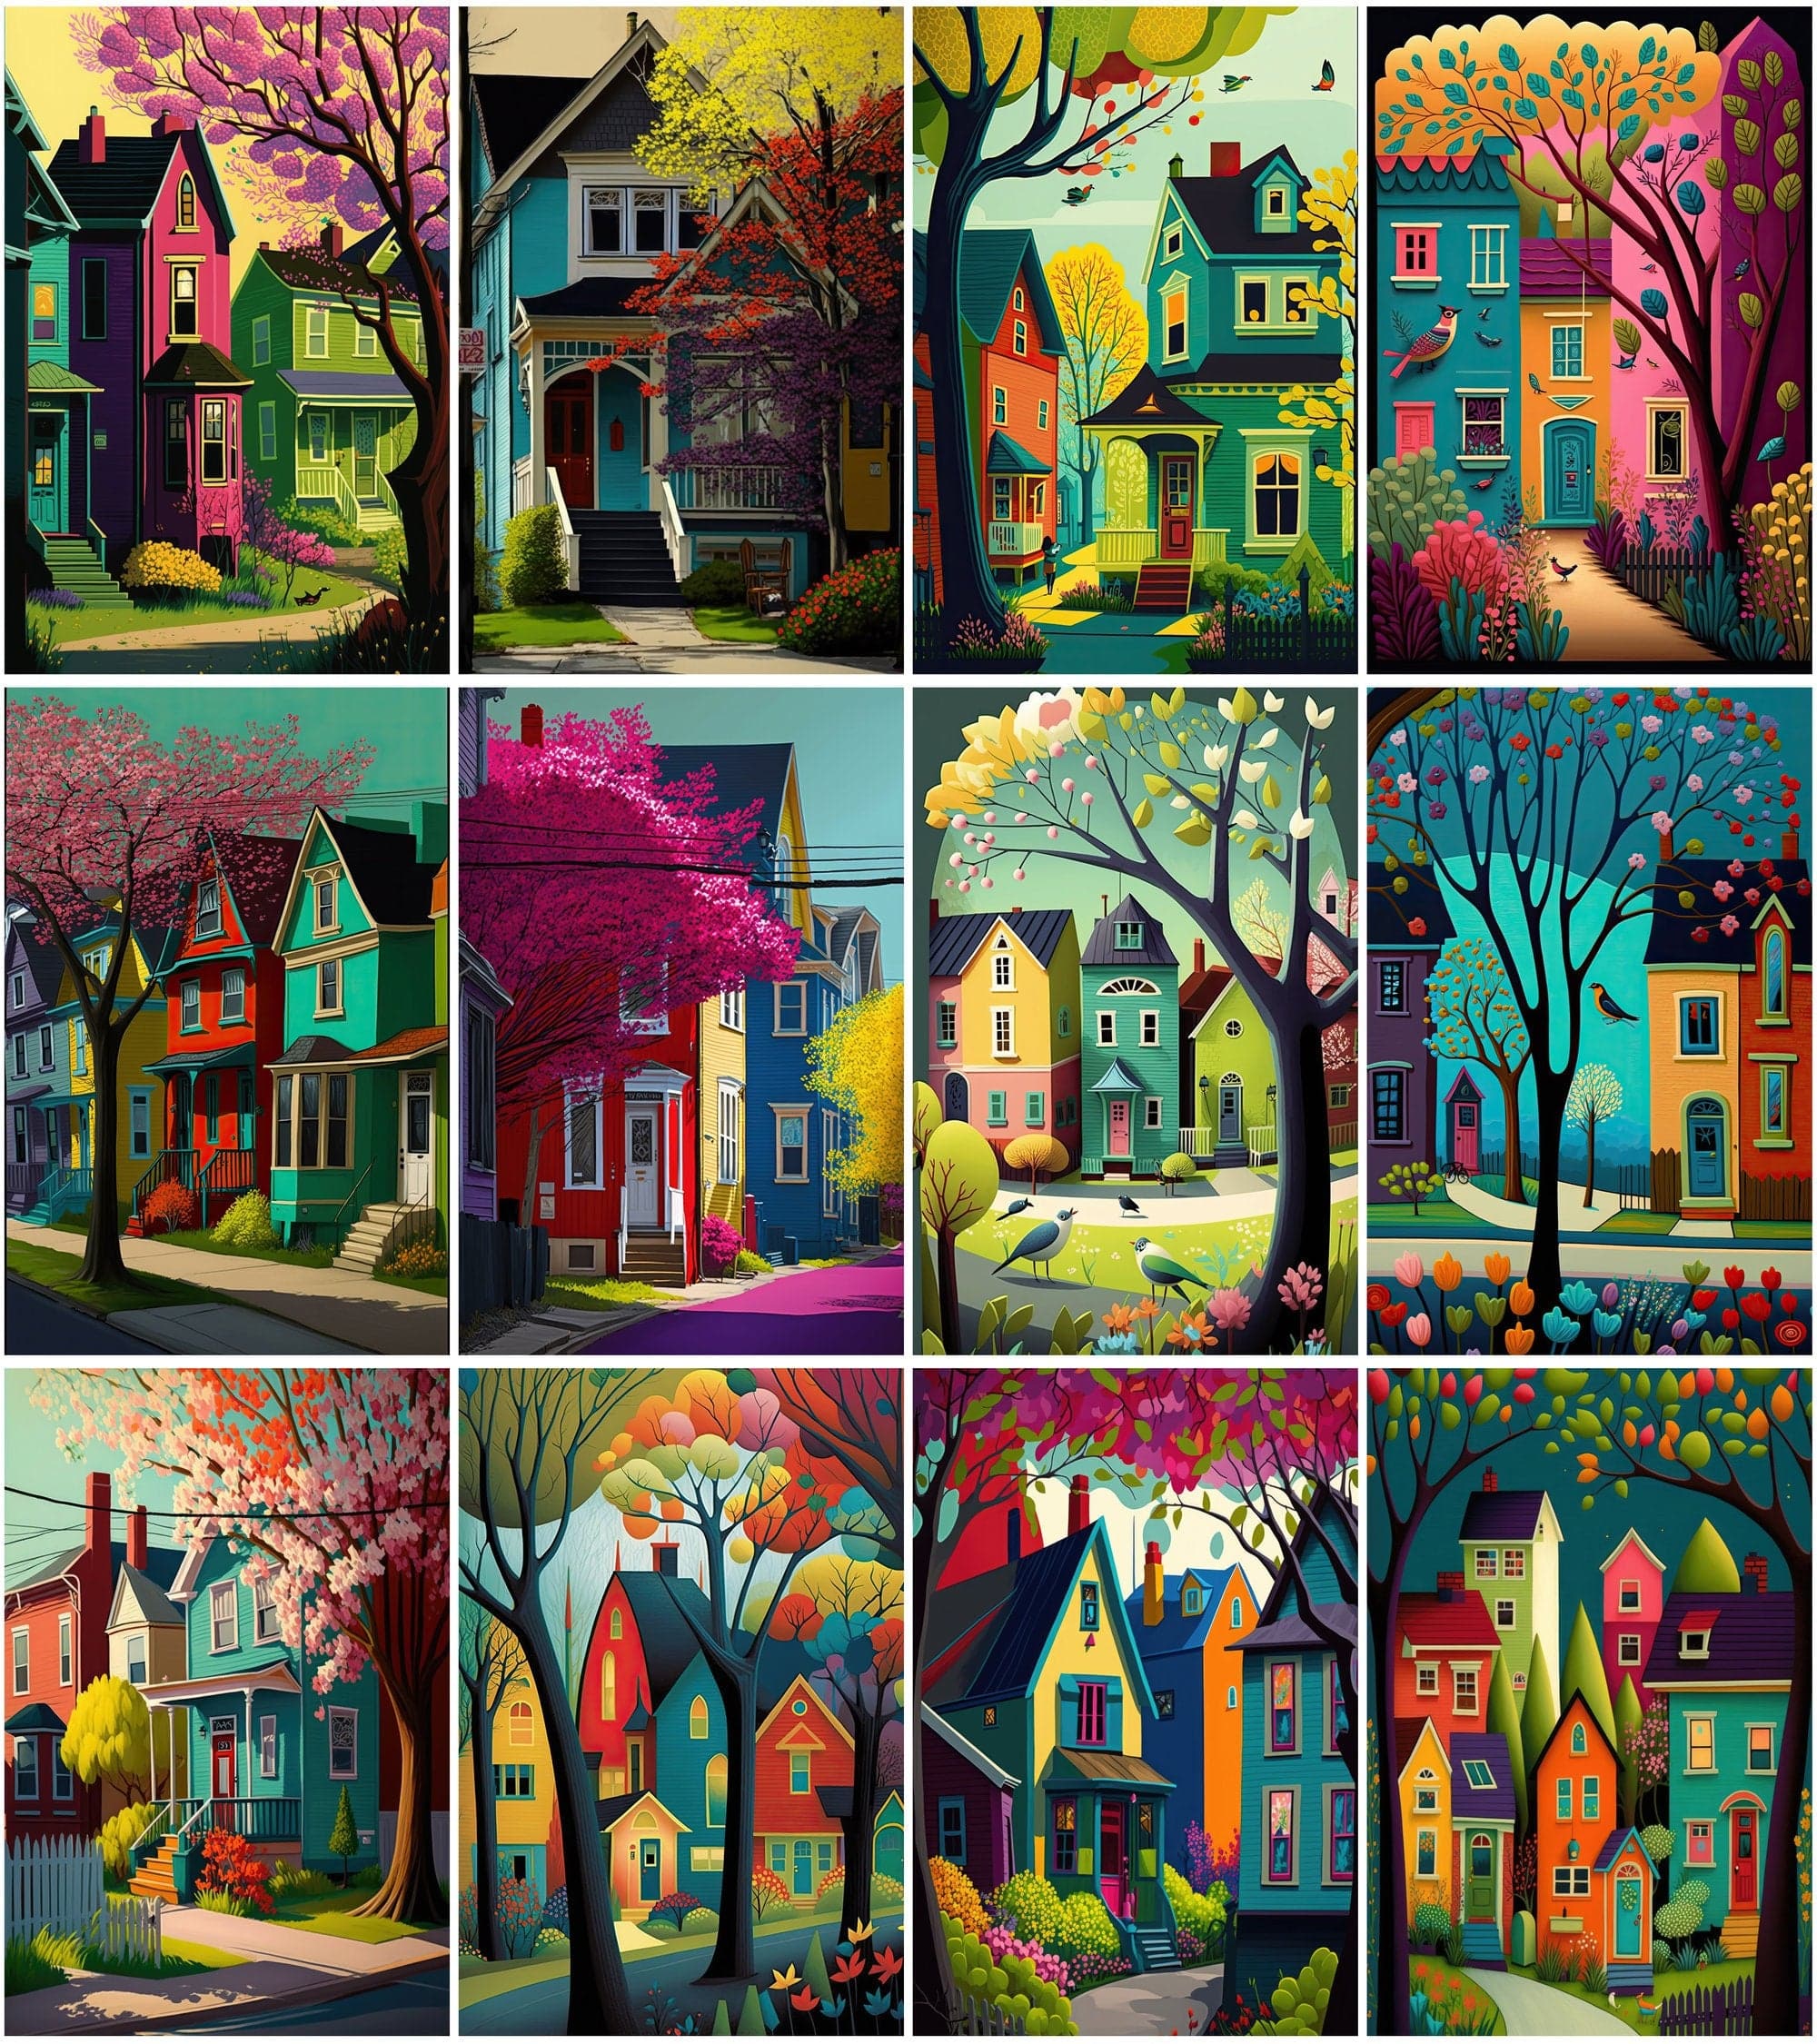 Neighbourhood Houses Backgrounds - Set of 100 Images for Canvas or Print, Houses clipart, Commercial use houses with vibrant colors. Digital Download Sumobundle